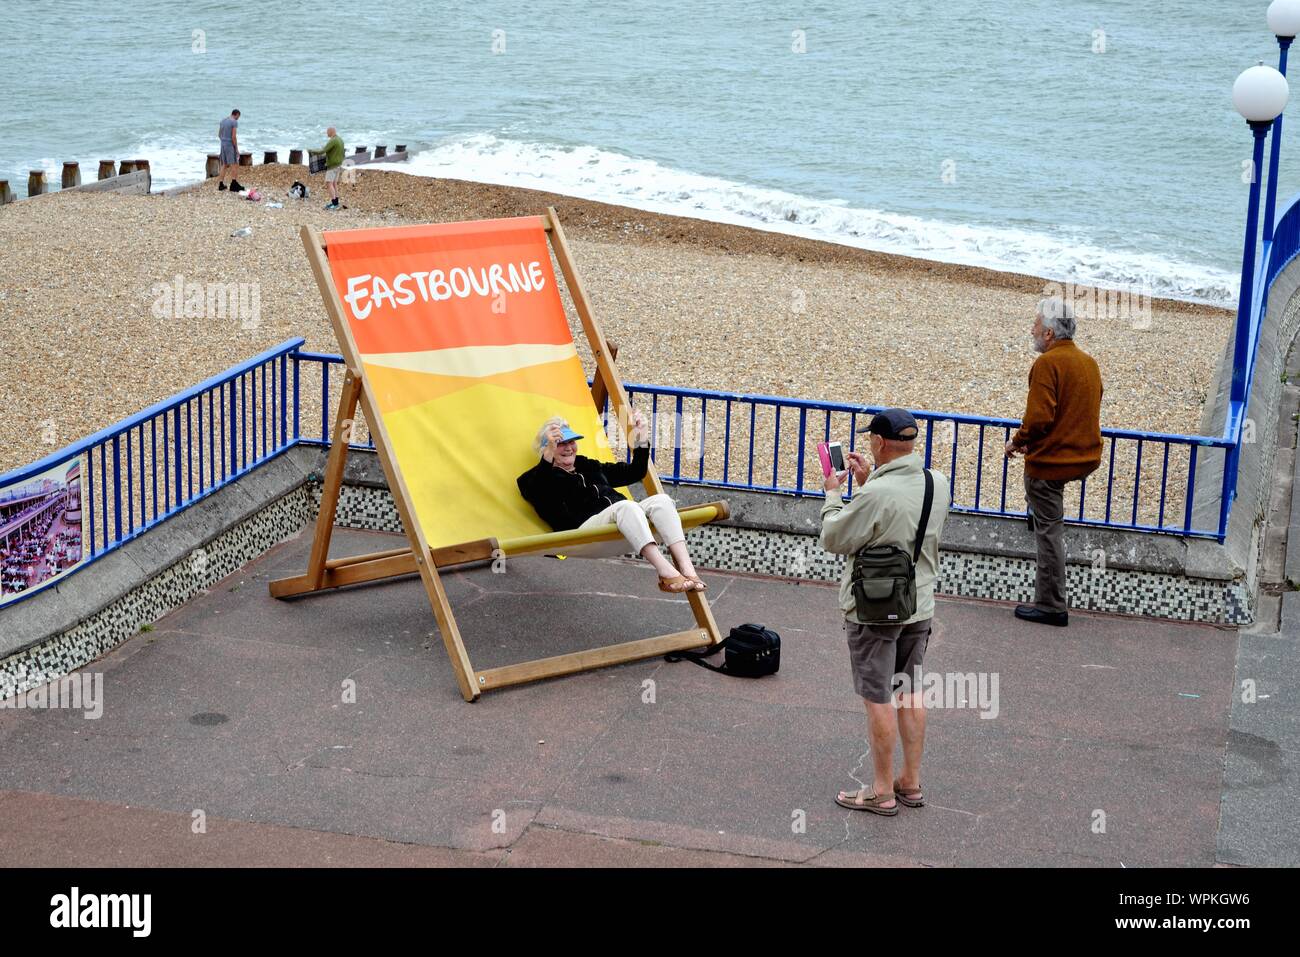 An old lady sitting on an oversized deckchair having fun and waving her arms while being photographed on Eastbourne seafront, Sussex England UK Stock Photo